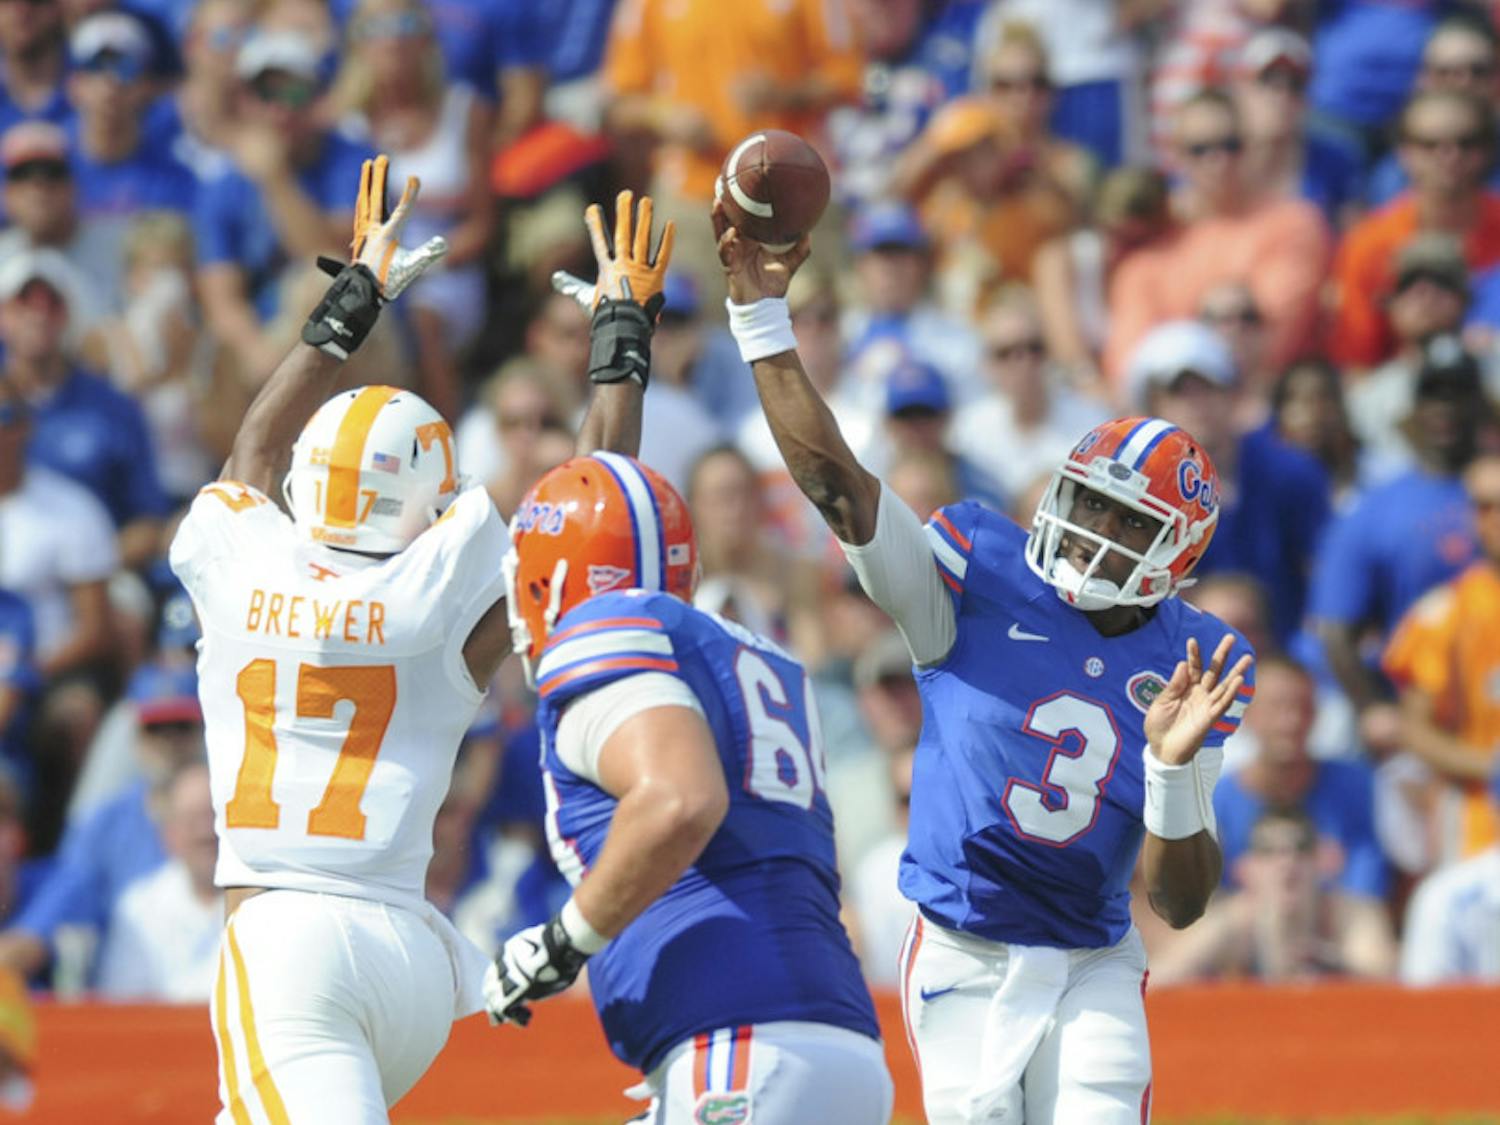 Tyler Murphy took over at quarterback for the injured Jeff Driskel and completed 8 of his 14 passes for 134 yards and a touchdown Saturday against Tennessee.